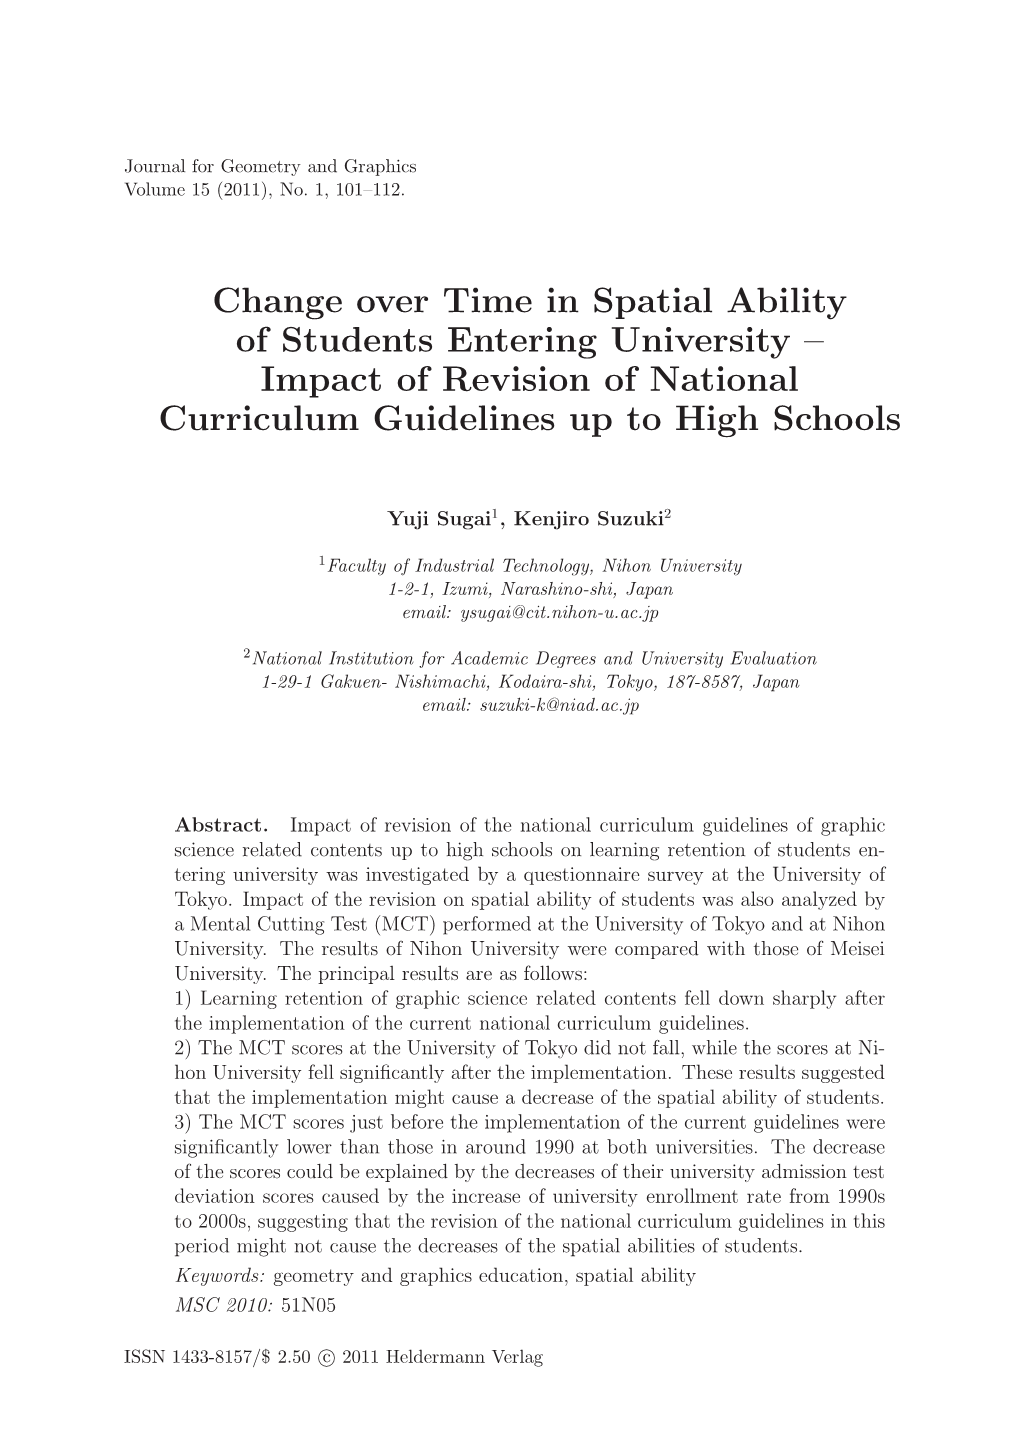 Change Over Time in Spatial Ability of Students Entering University – Impact of Revision of National Curriculum Guidelines up to High Schools